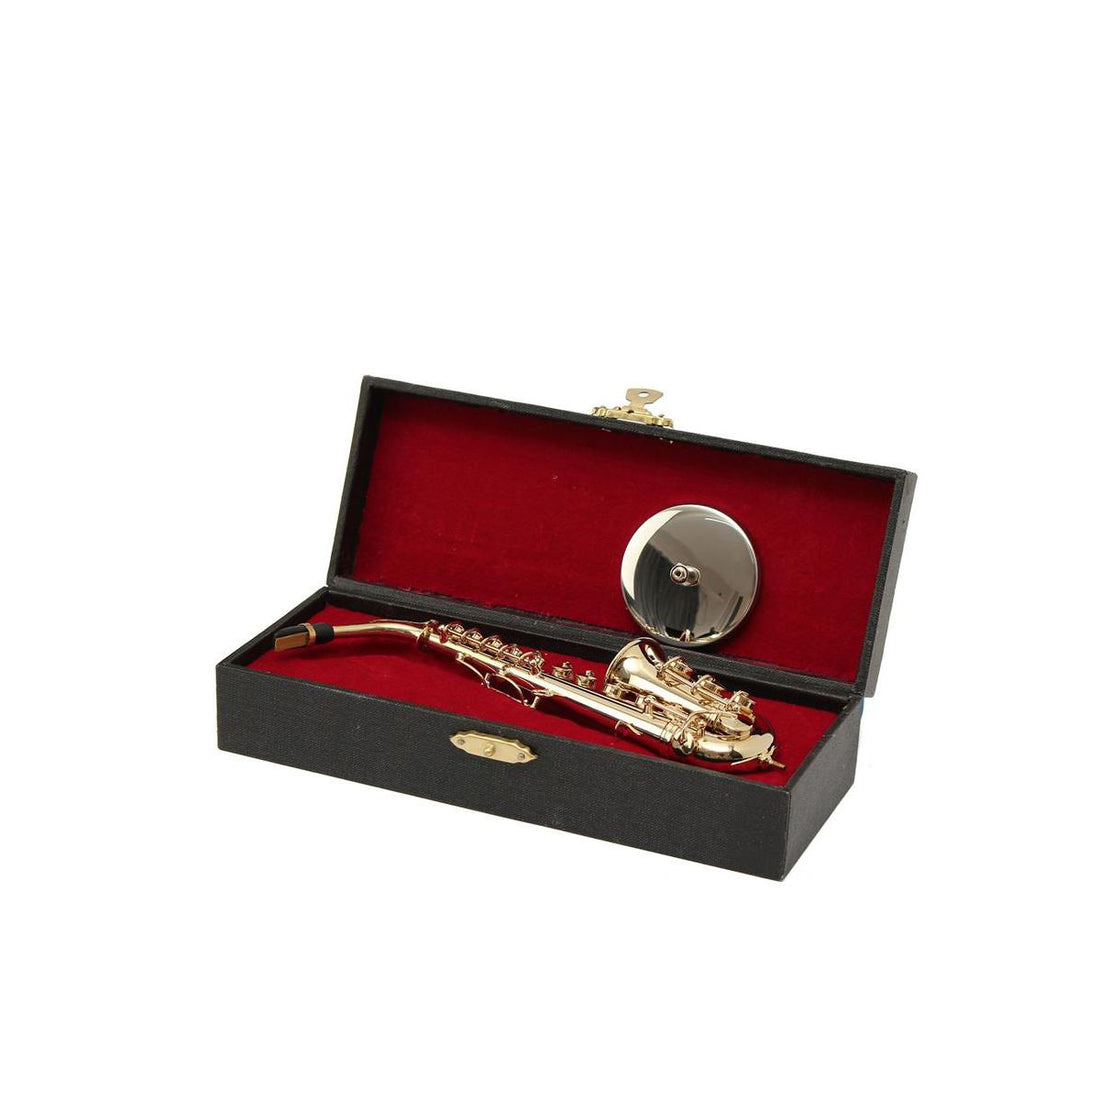 Mini Alto-Saxophone - For Display Only